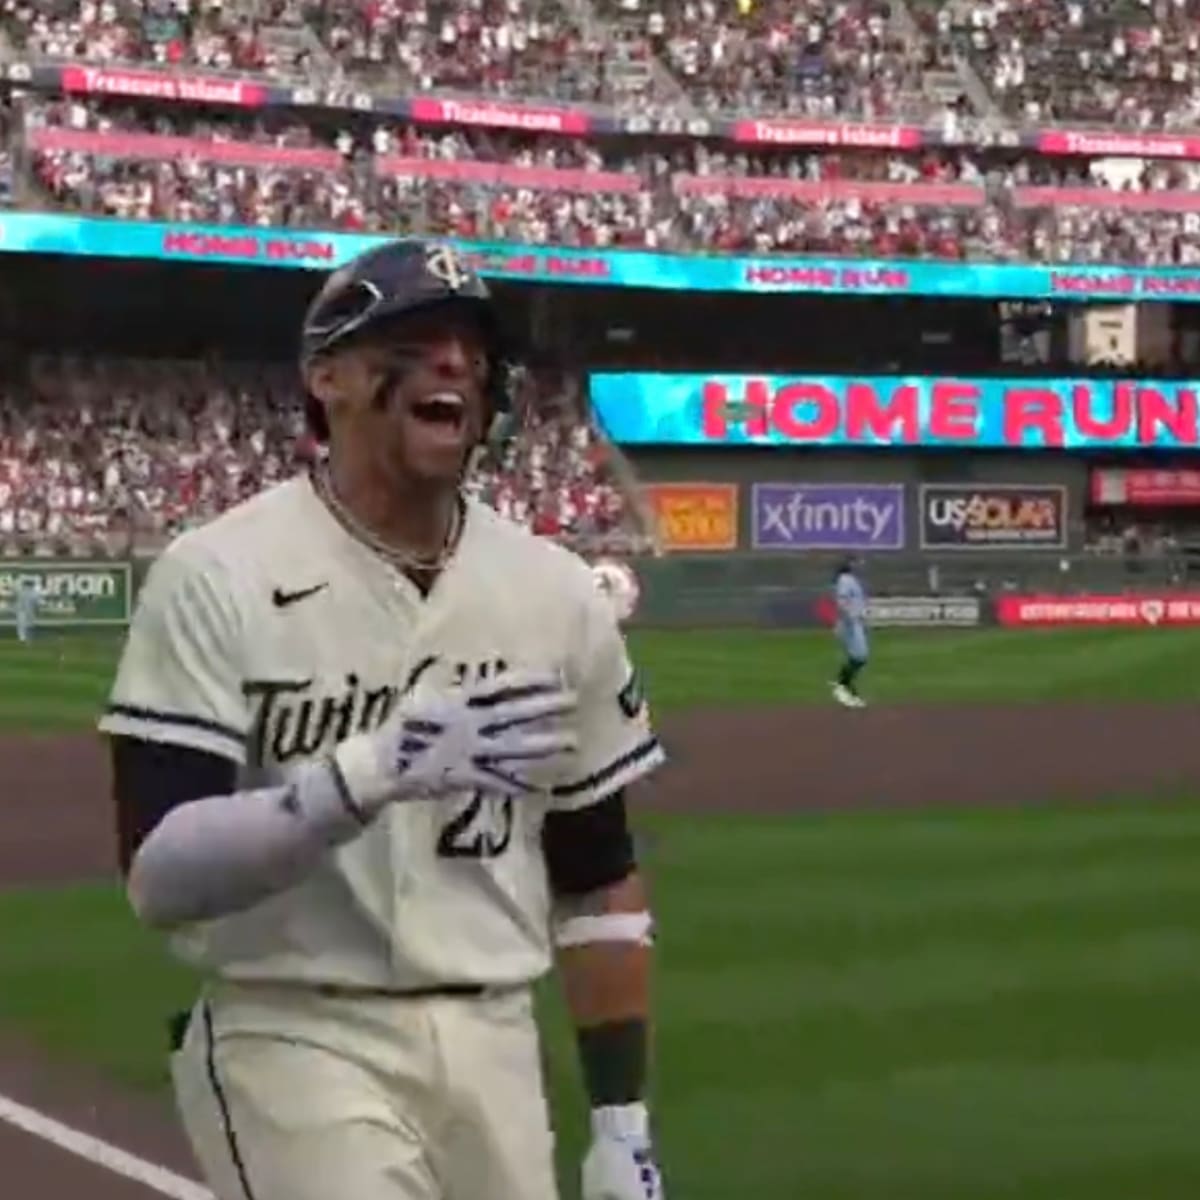 Watch: The legend of Royce Lewis grows with first-inning home run